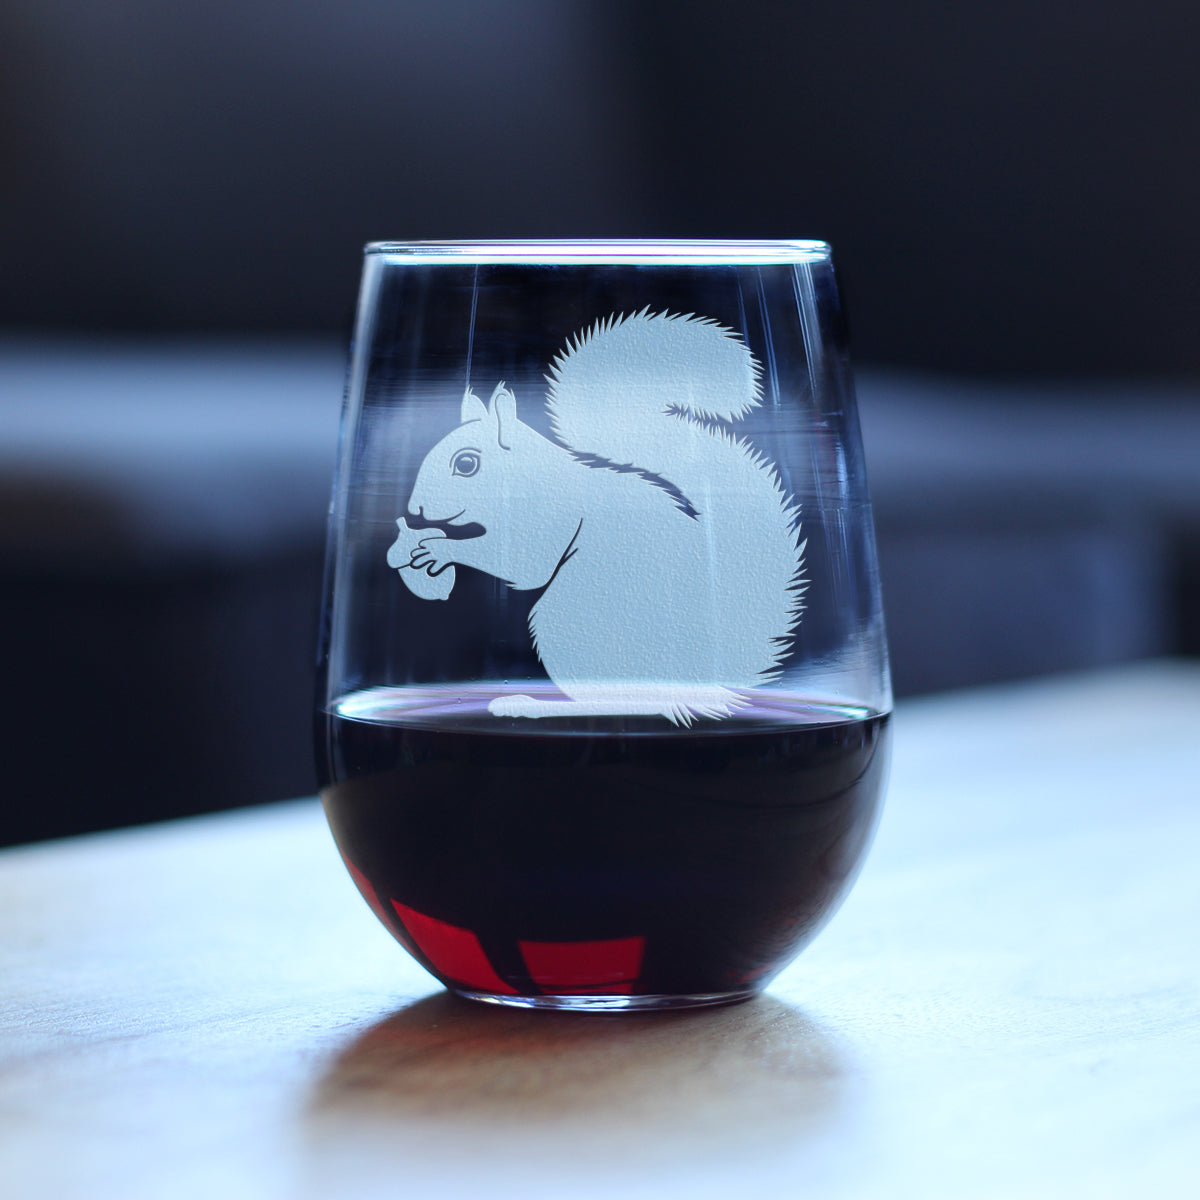 Squirrel Stemless Wine Glass - Squirrel Gifts and Decor with Squirrels - Large 17 Oz Glasses